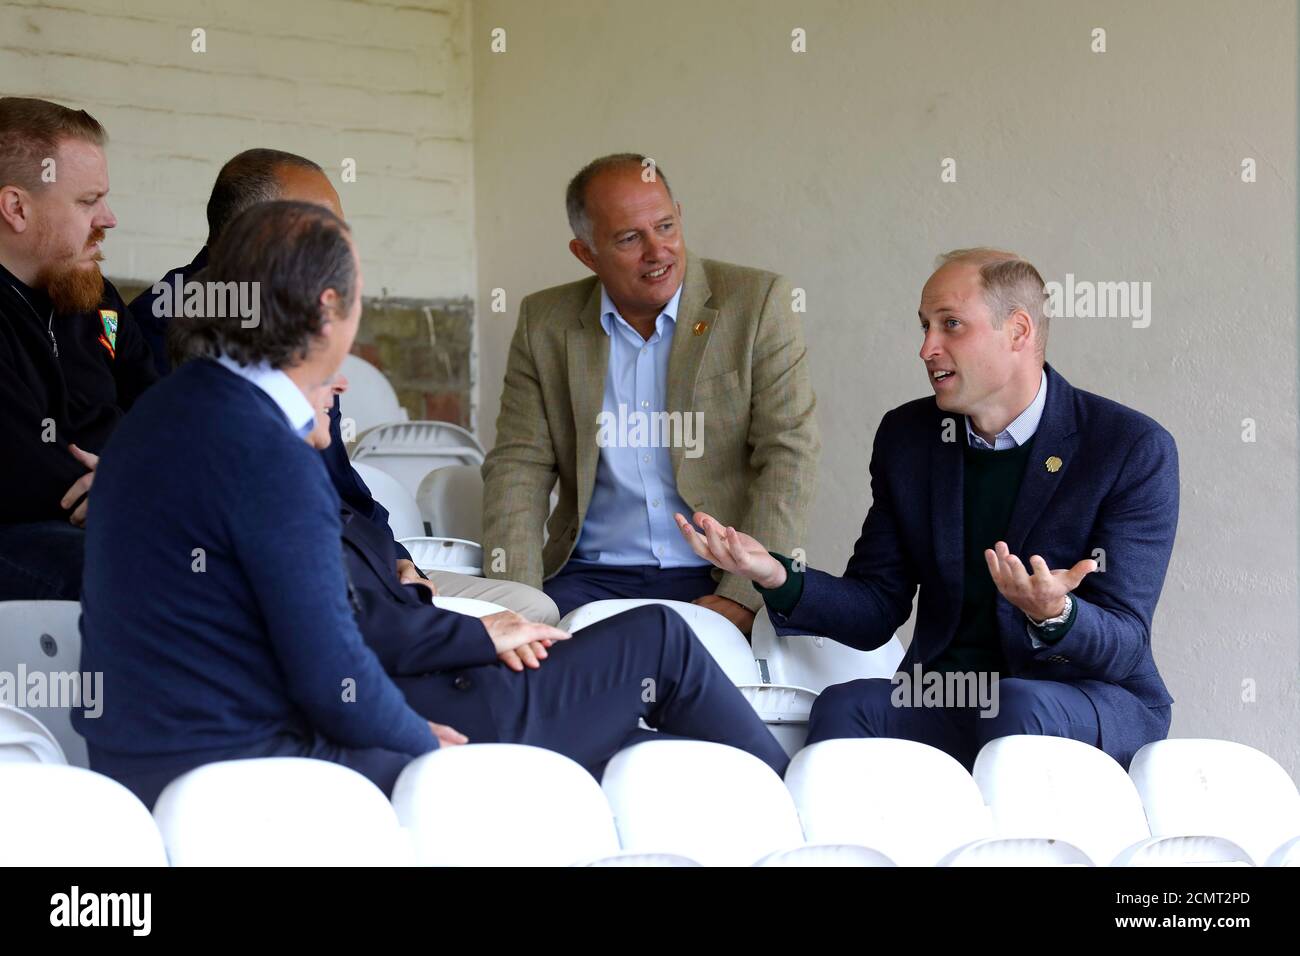 Britain's Prince William, Duke of Cambridge gestures as he speaks to Rob Morris, Co-Owner of Silver Jubilee Park and Vice President of Hendon F.C. and Edgware Town F.C., and club officials during his visit to Hendon FC, as part of the Heads Up mental health campaign at Hendon F.C., in London, Britain September 6, 2019. Tim P. Whitby/Pool via REUTERS Stock Photo